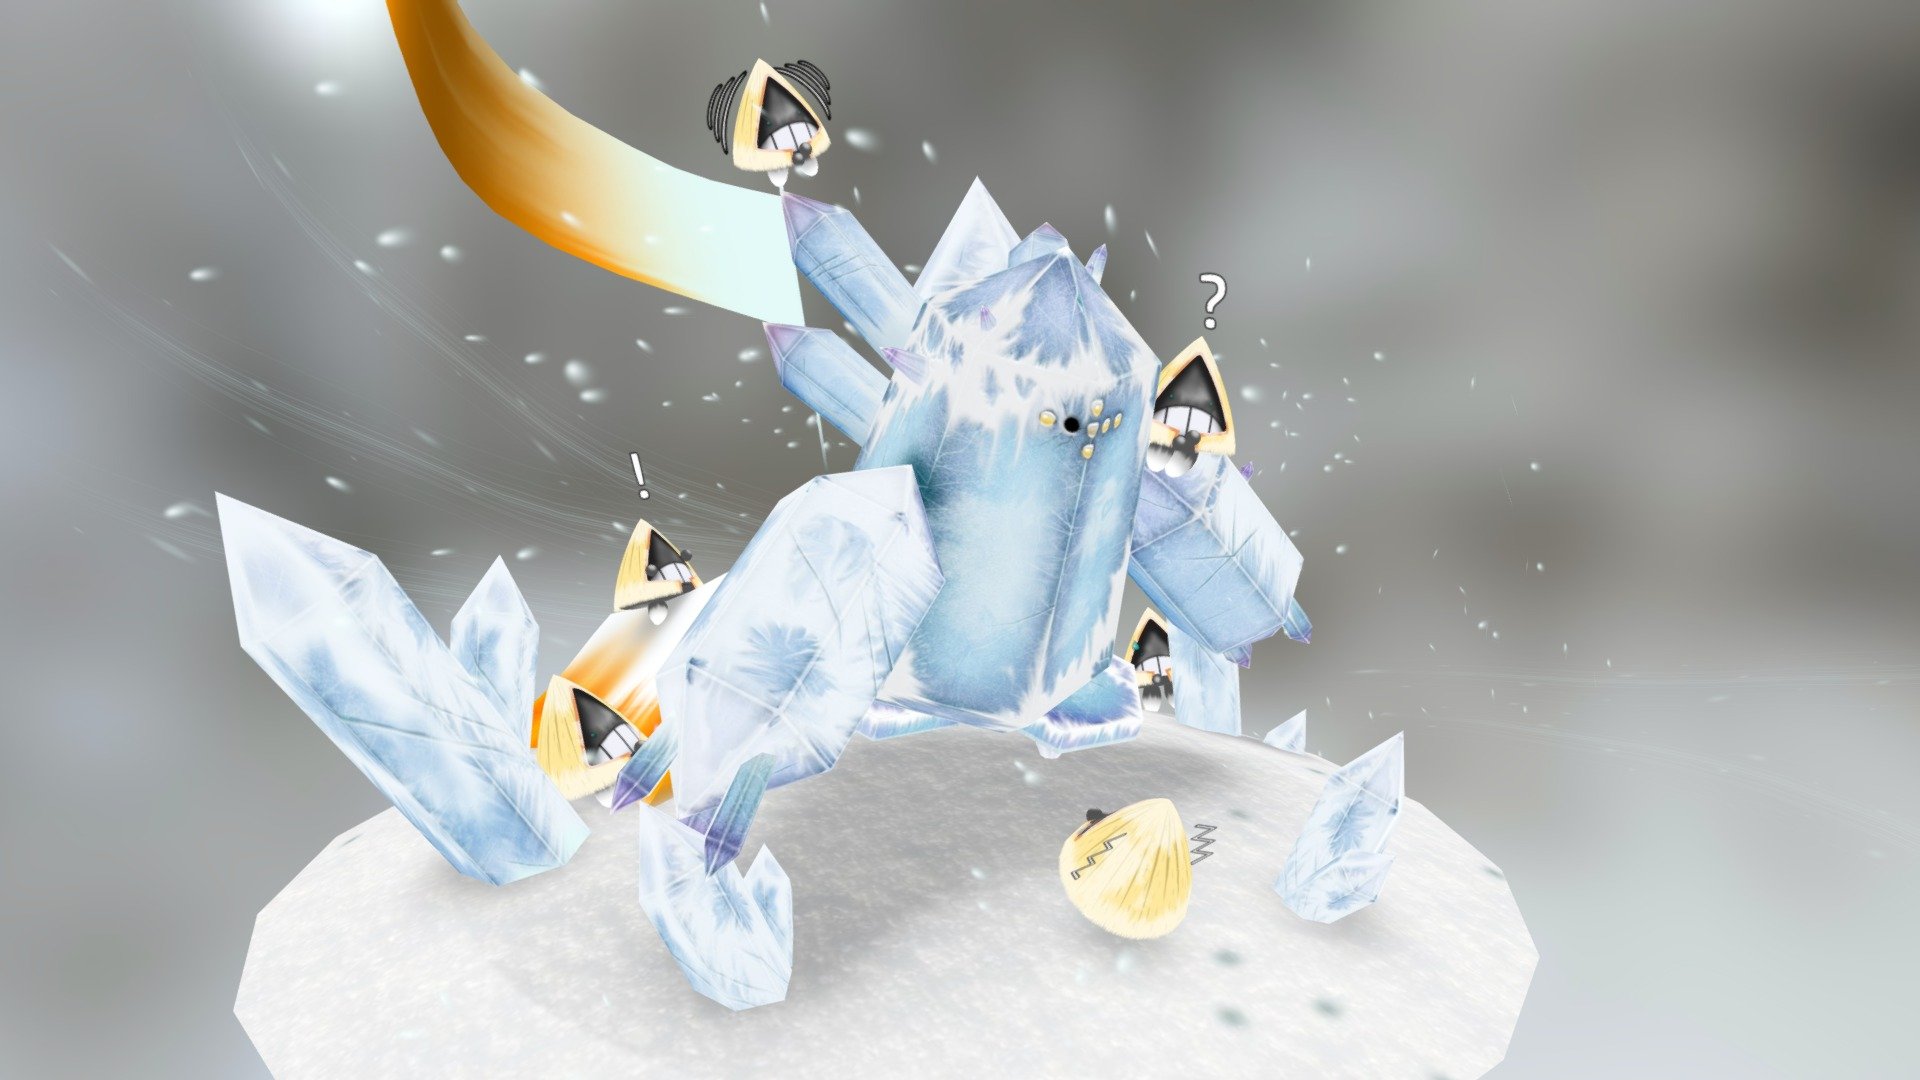 Watching over Pokemon and campers alike, Regice ensures nothing happens to disturb the peace and tranquility of his frozen home. The Snorunt on the other hand&hellip; They just like to play!

Wind recorded by Mike Koenig - Hand Painted Regice: Guardian of the Mountain - 3D model by jakecarney 3d model